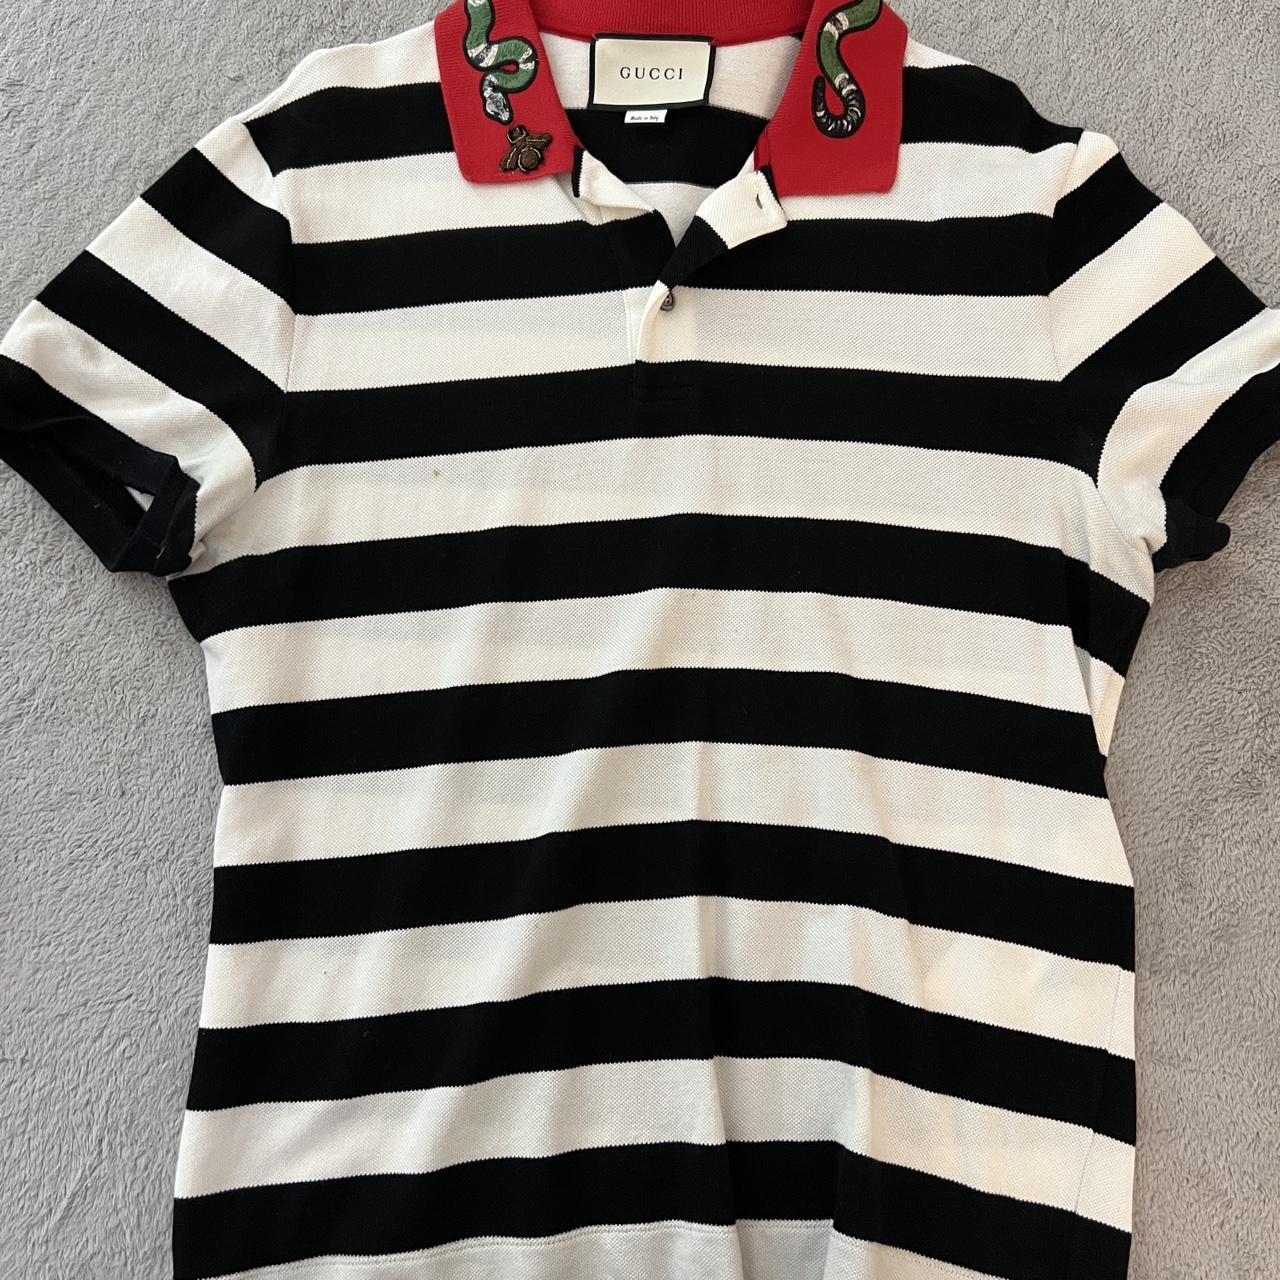 SUPREME X GUCCI SNAKE POLO SHIRT  Tennis clothes, Trending outfits, Polo  shirt for men